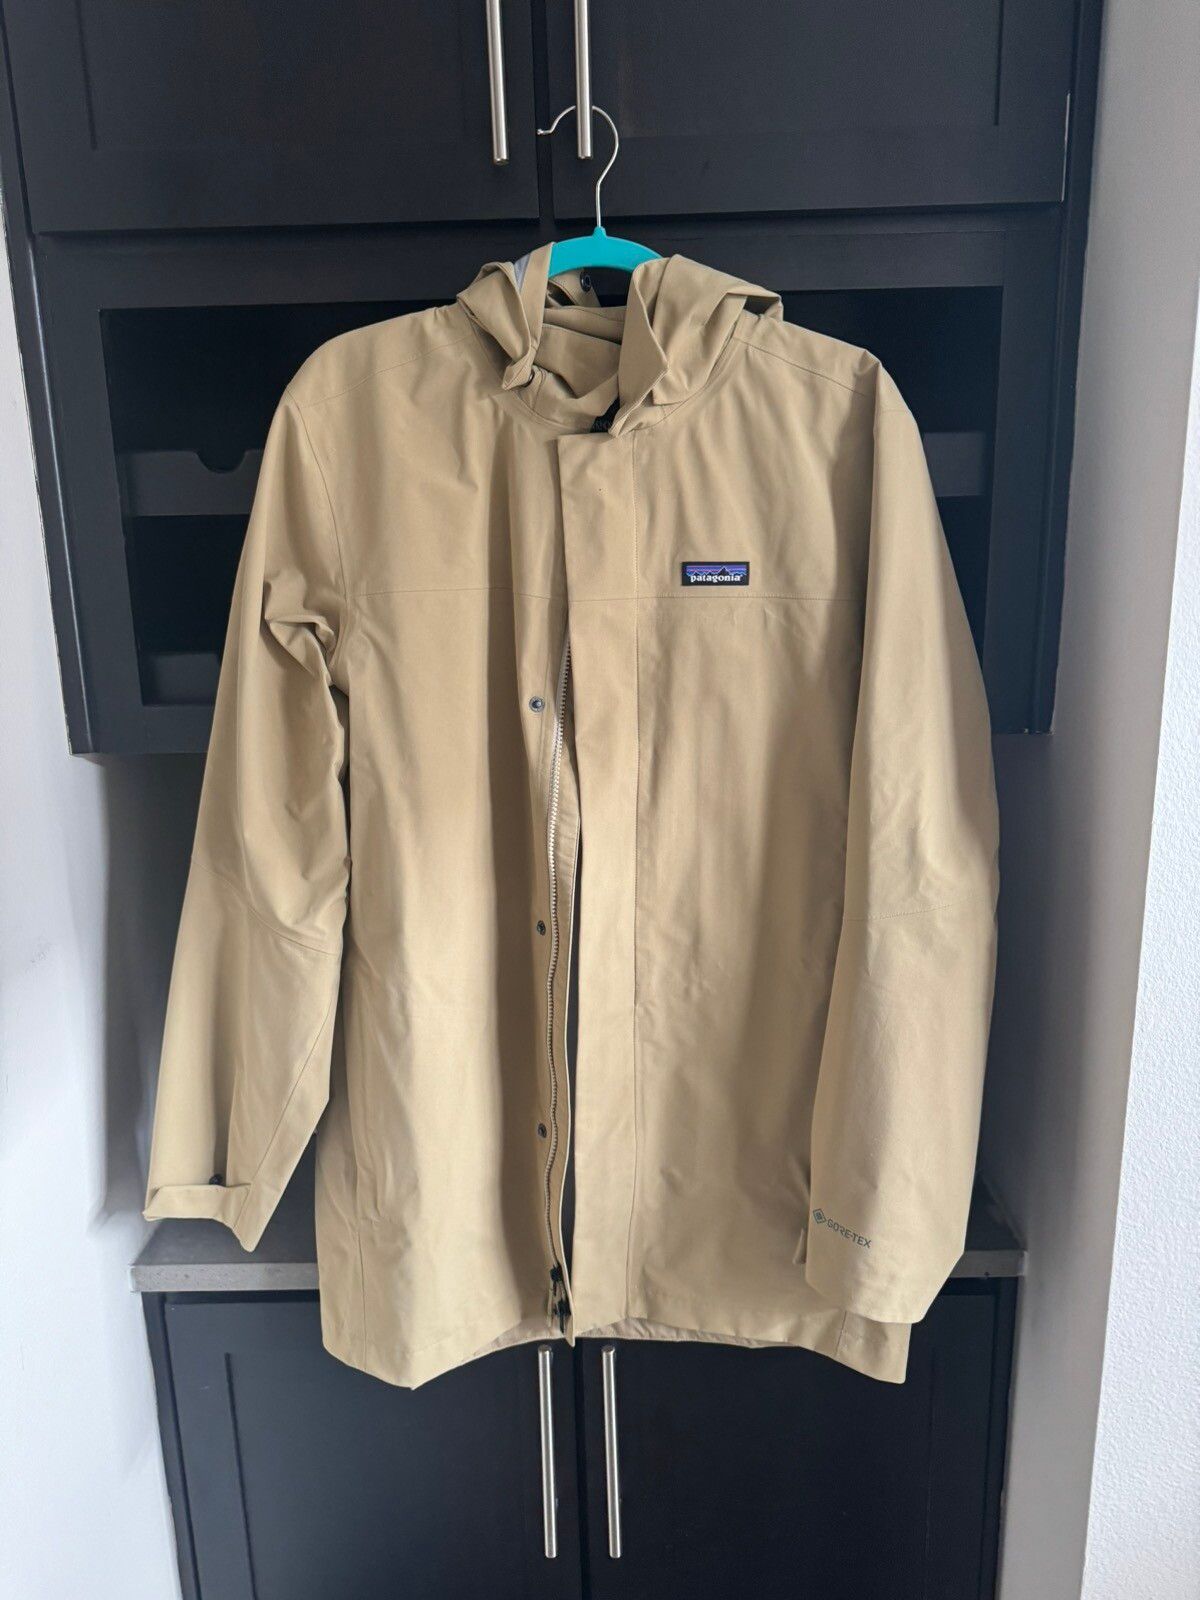 Patagonia LIGHT WEIGHT Patagonia wind/rain shell (GORE TEX) | Grailed